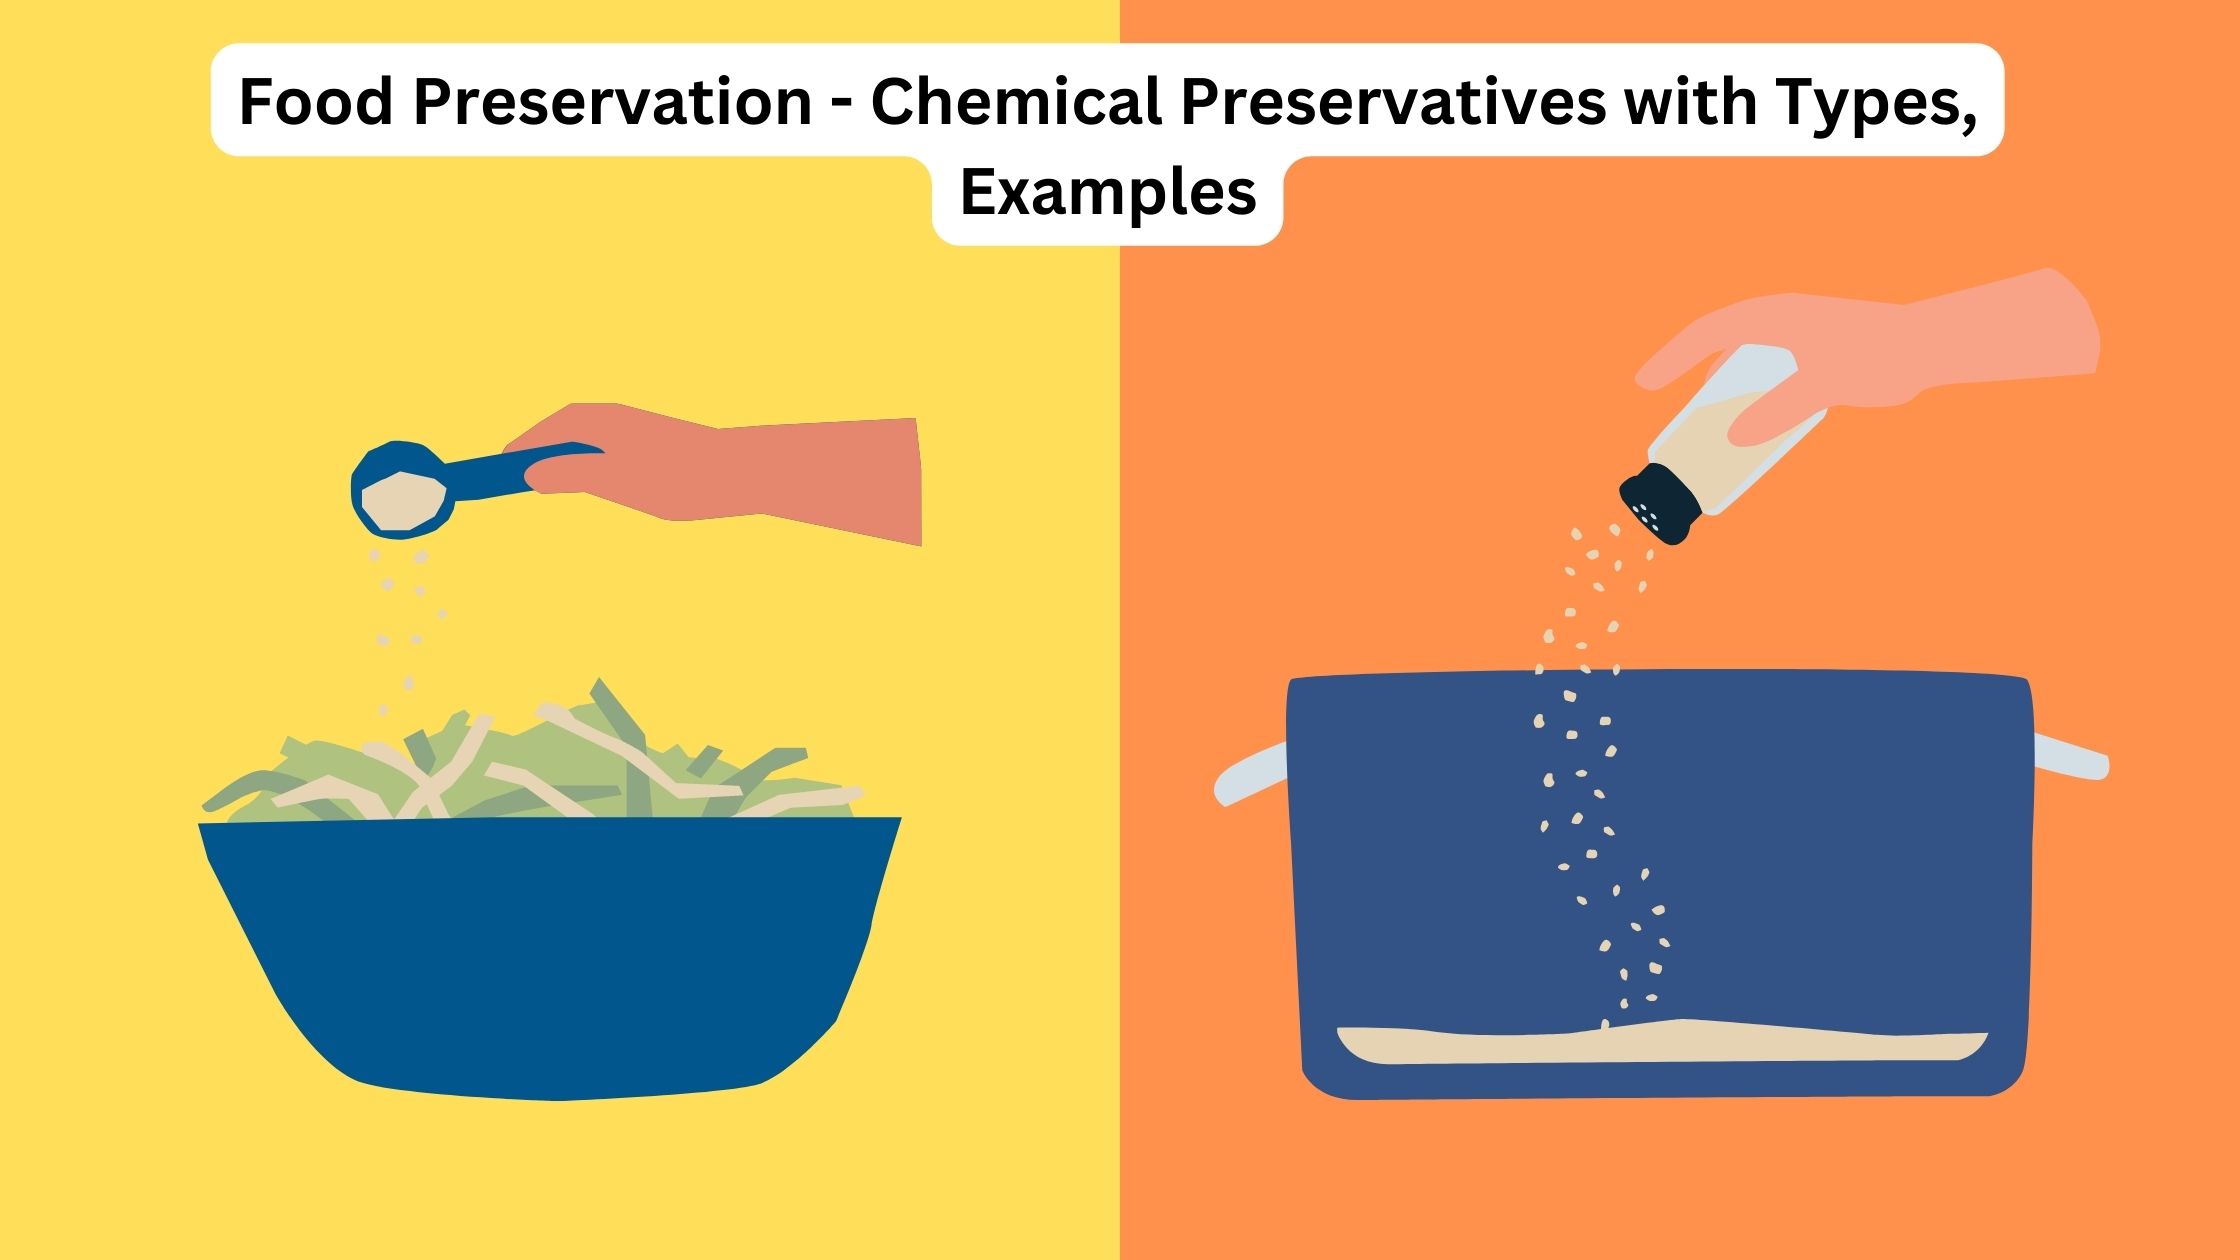 Food Preservation - Chemical Preservatives with Types, Examples